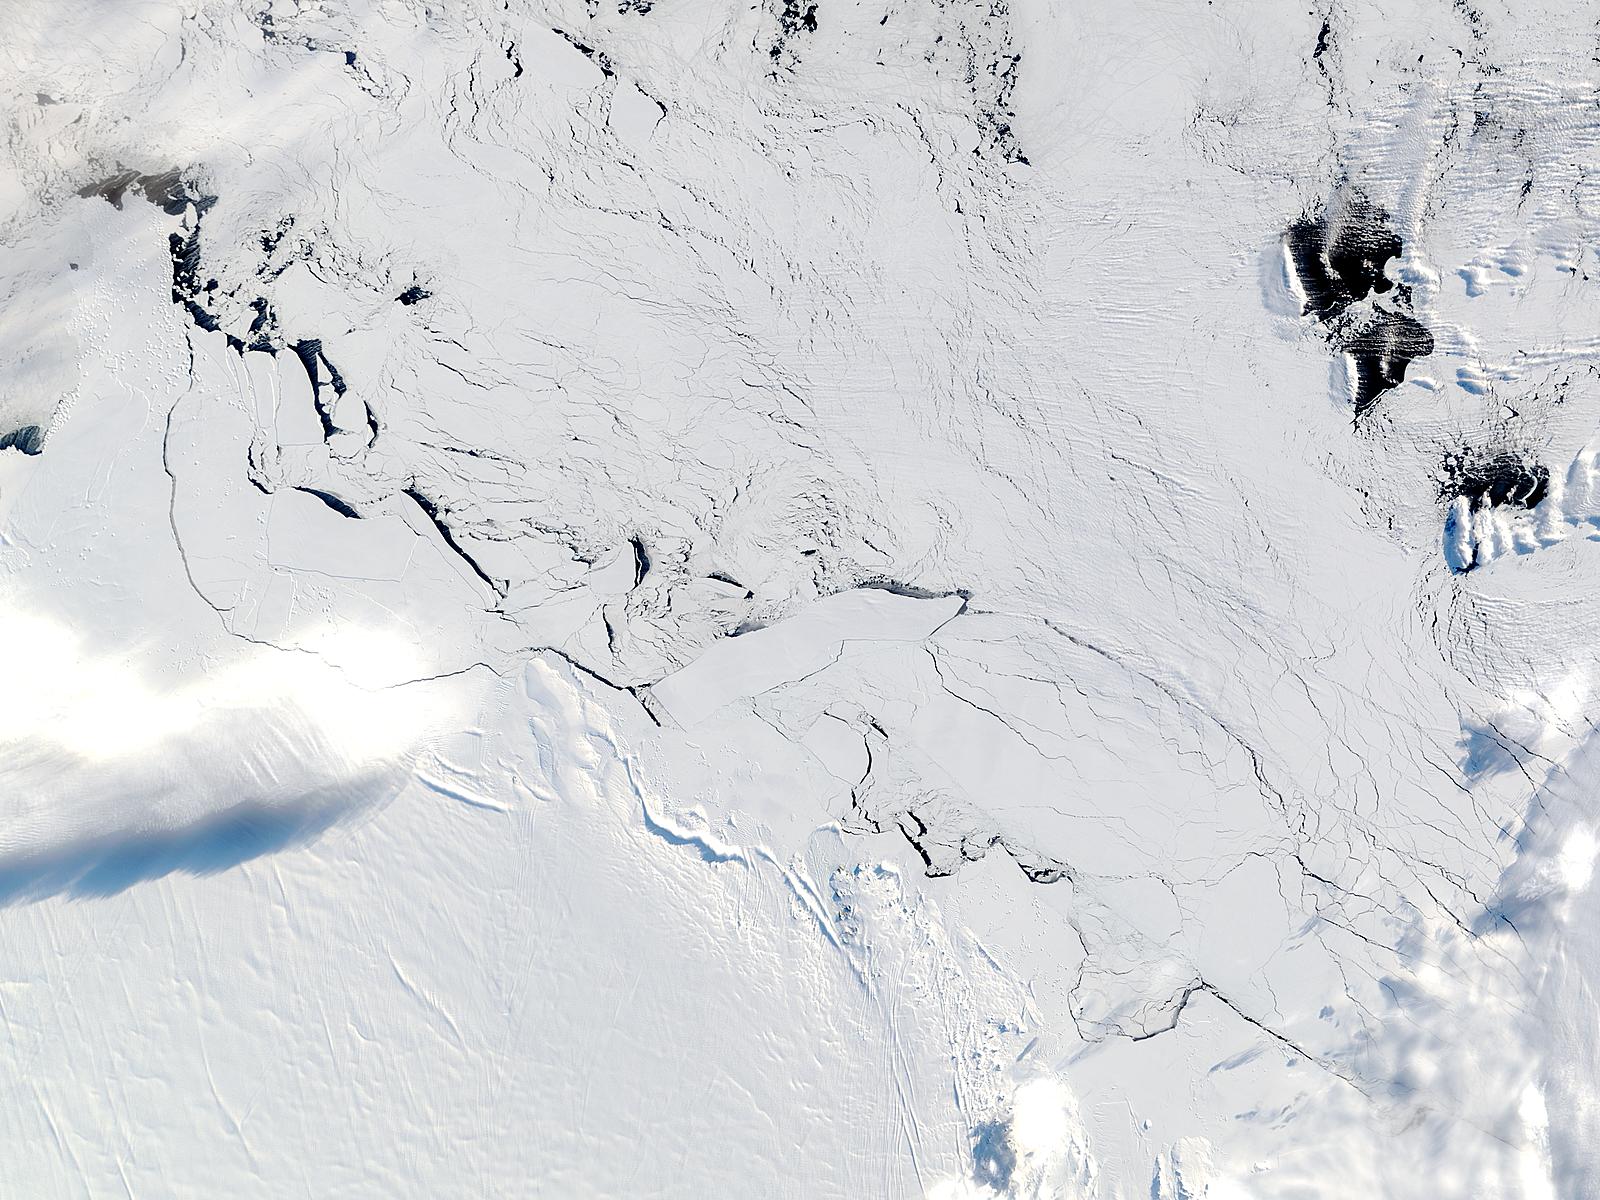 C-19 icebergs trapped in the ice off Mawson Peninsula, Antarctica - related image preview